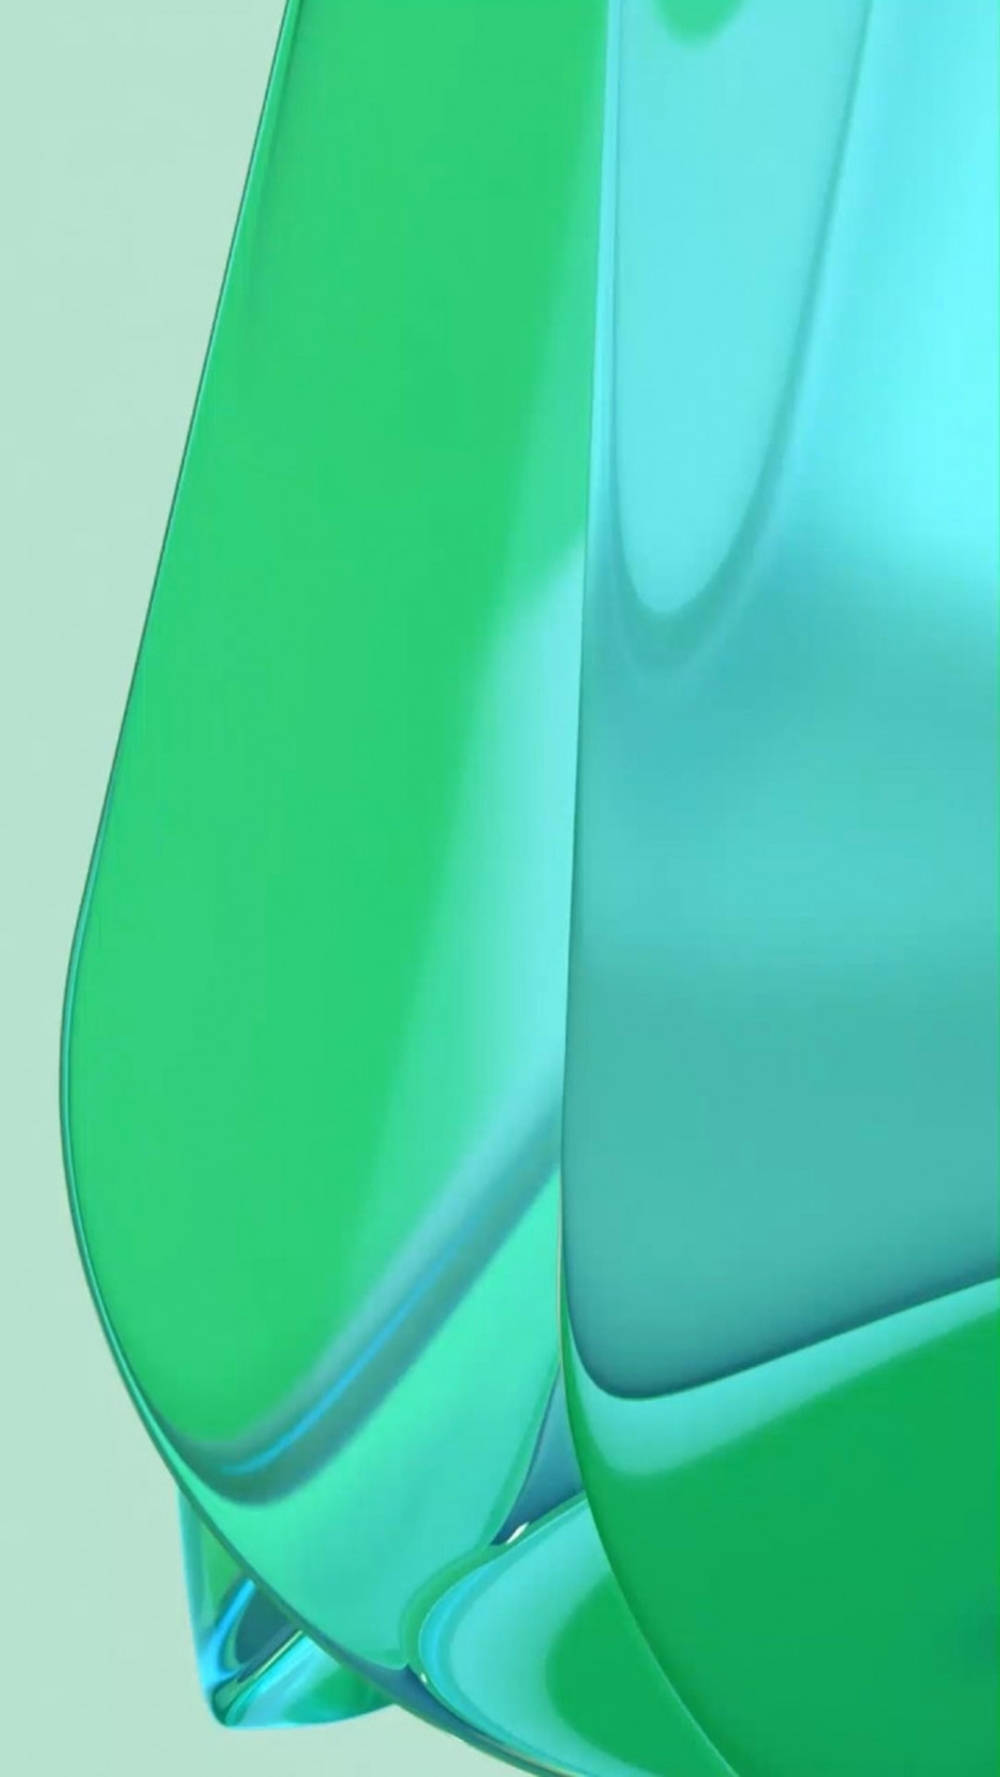 OnePlus 9 Pro in stunning Green Jelly color Wallpaper